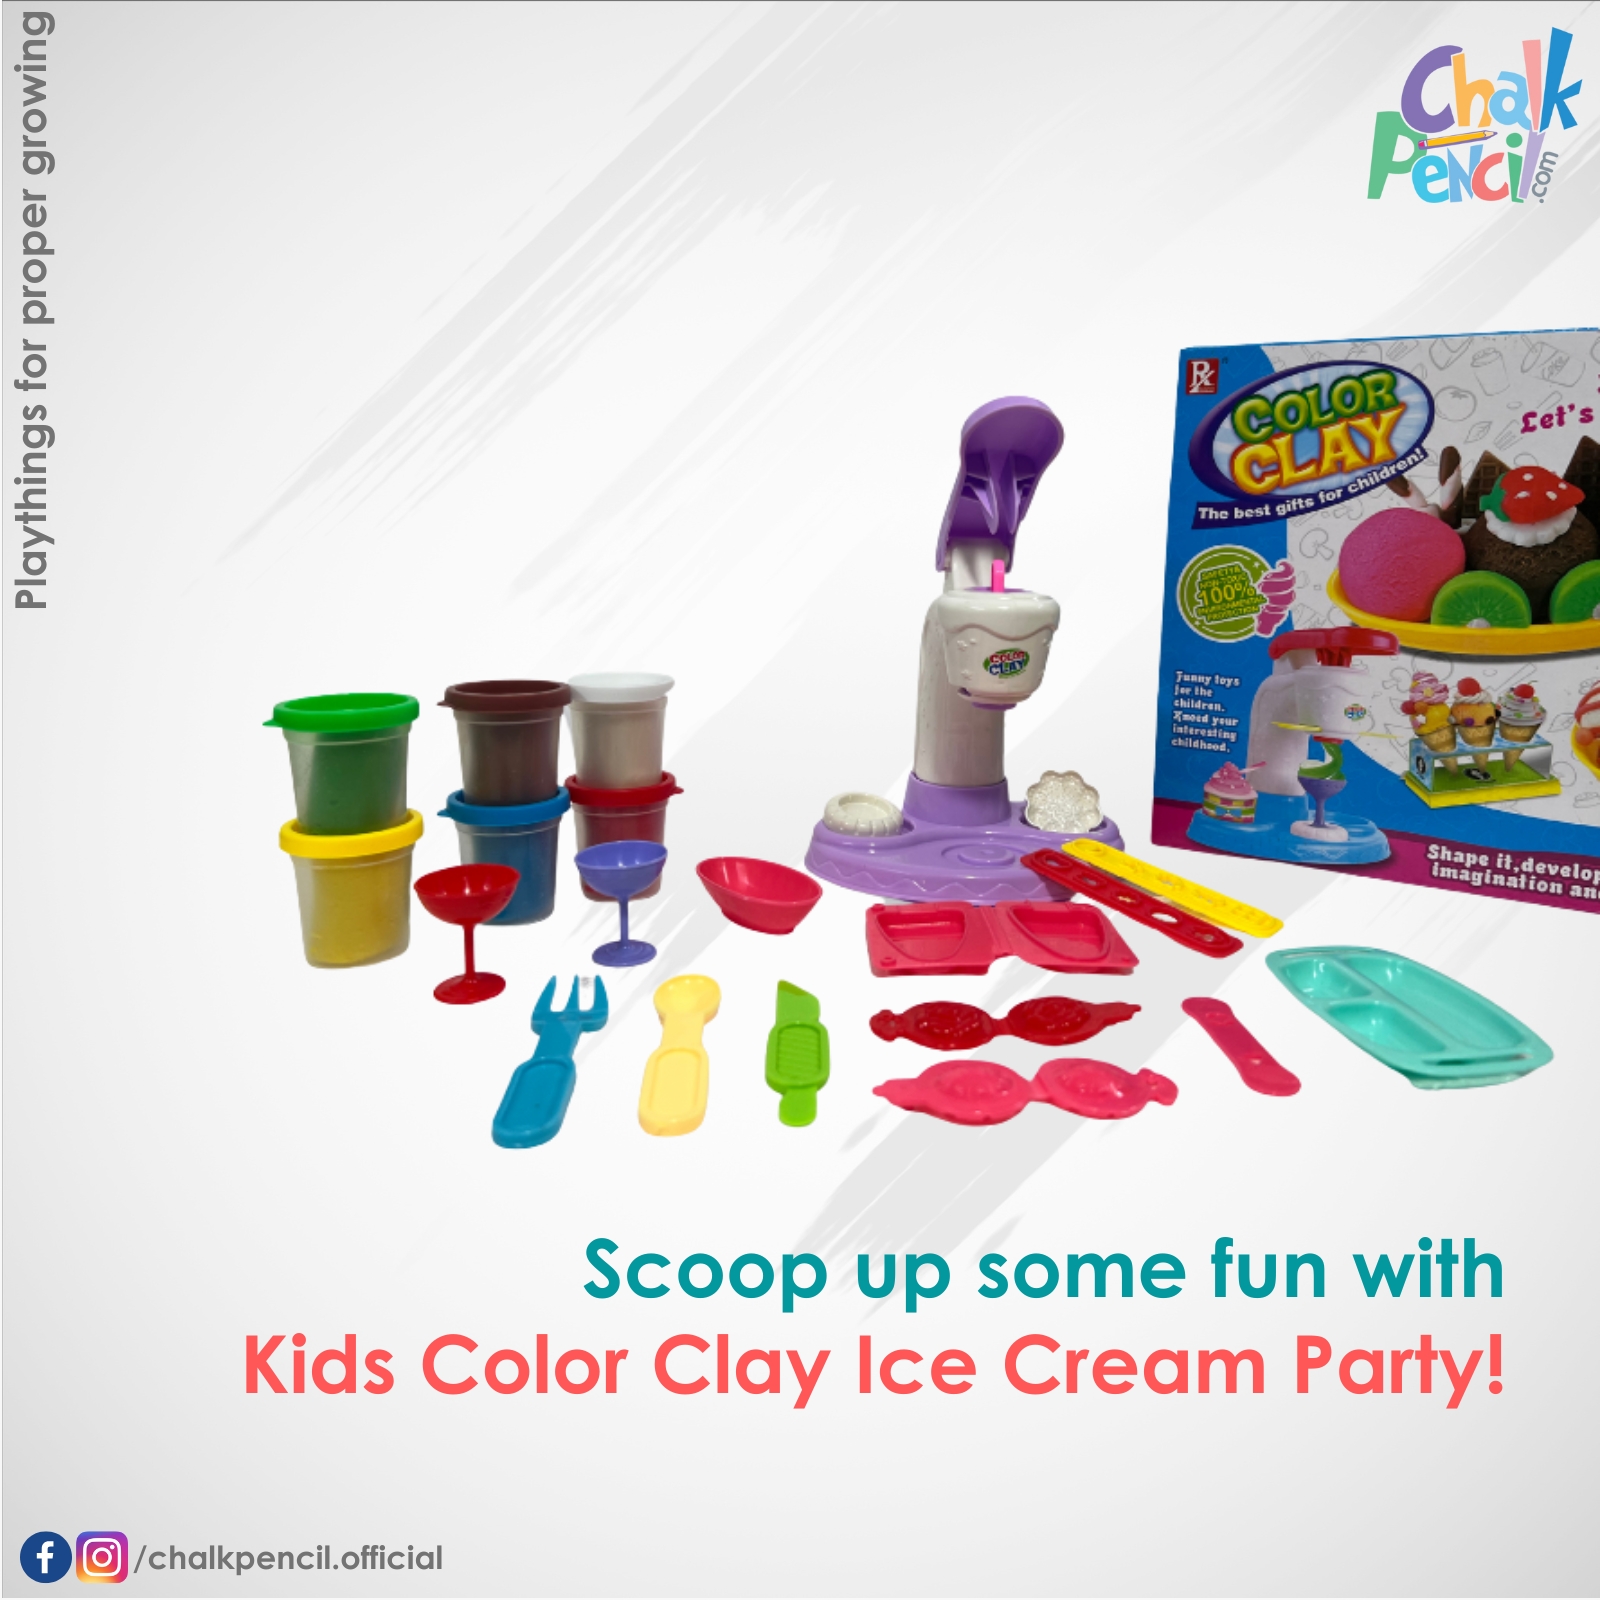 Kids Color Clay Ice Cream Party